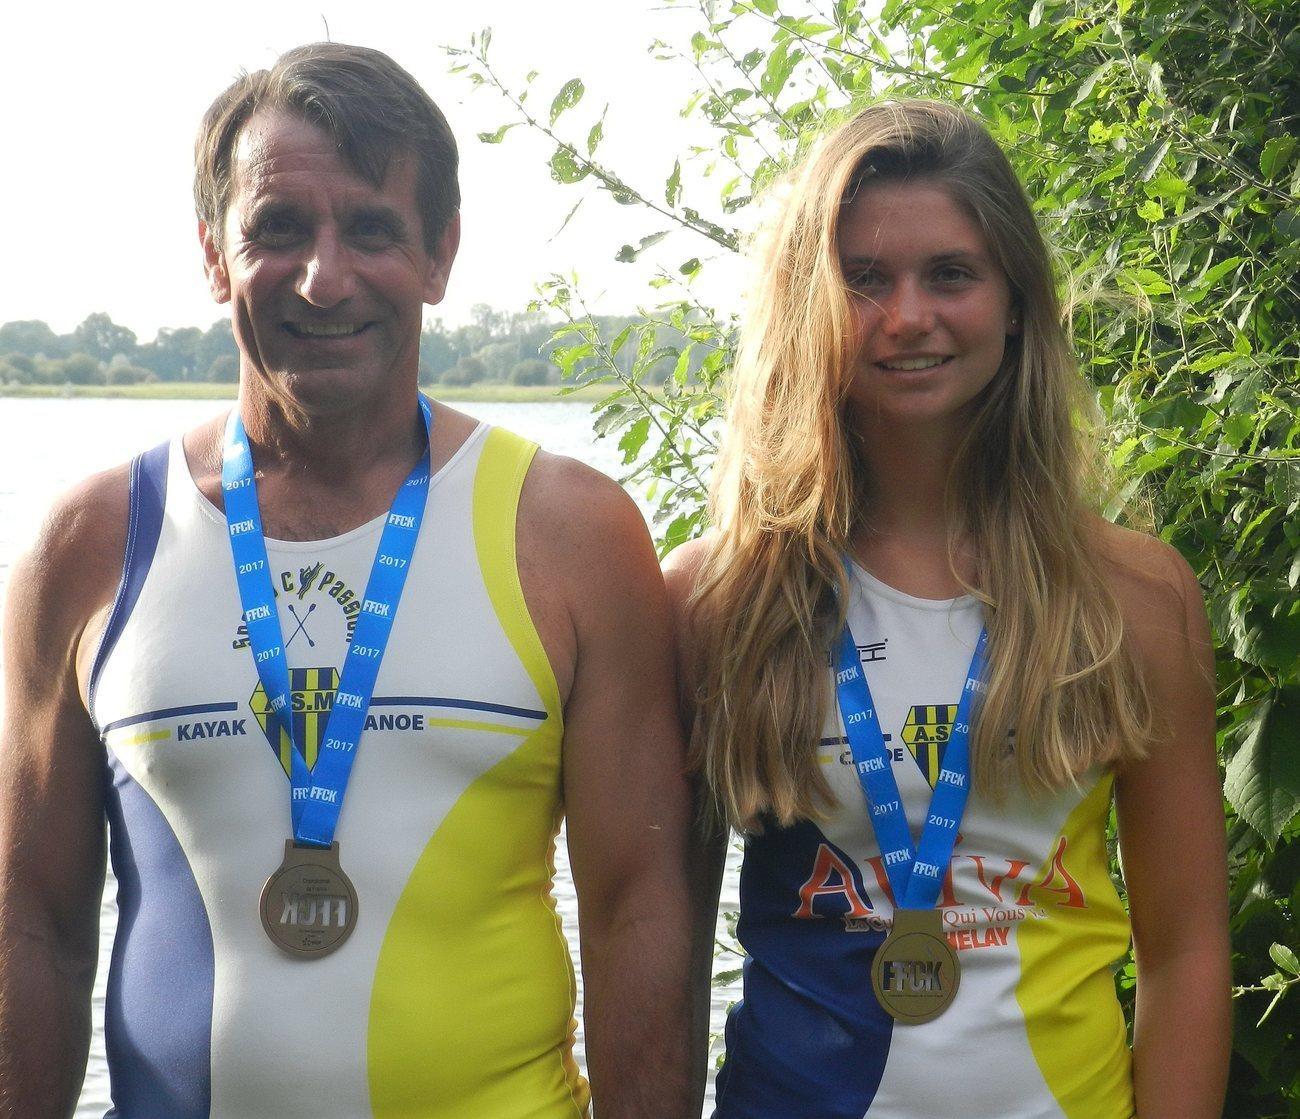 Patrick Lefoulon (AS Mantaise), here alongside his daughter, was Olympic vice-champion in the two-seater kayak at the 1984 Olympics.